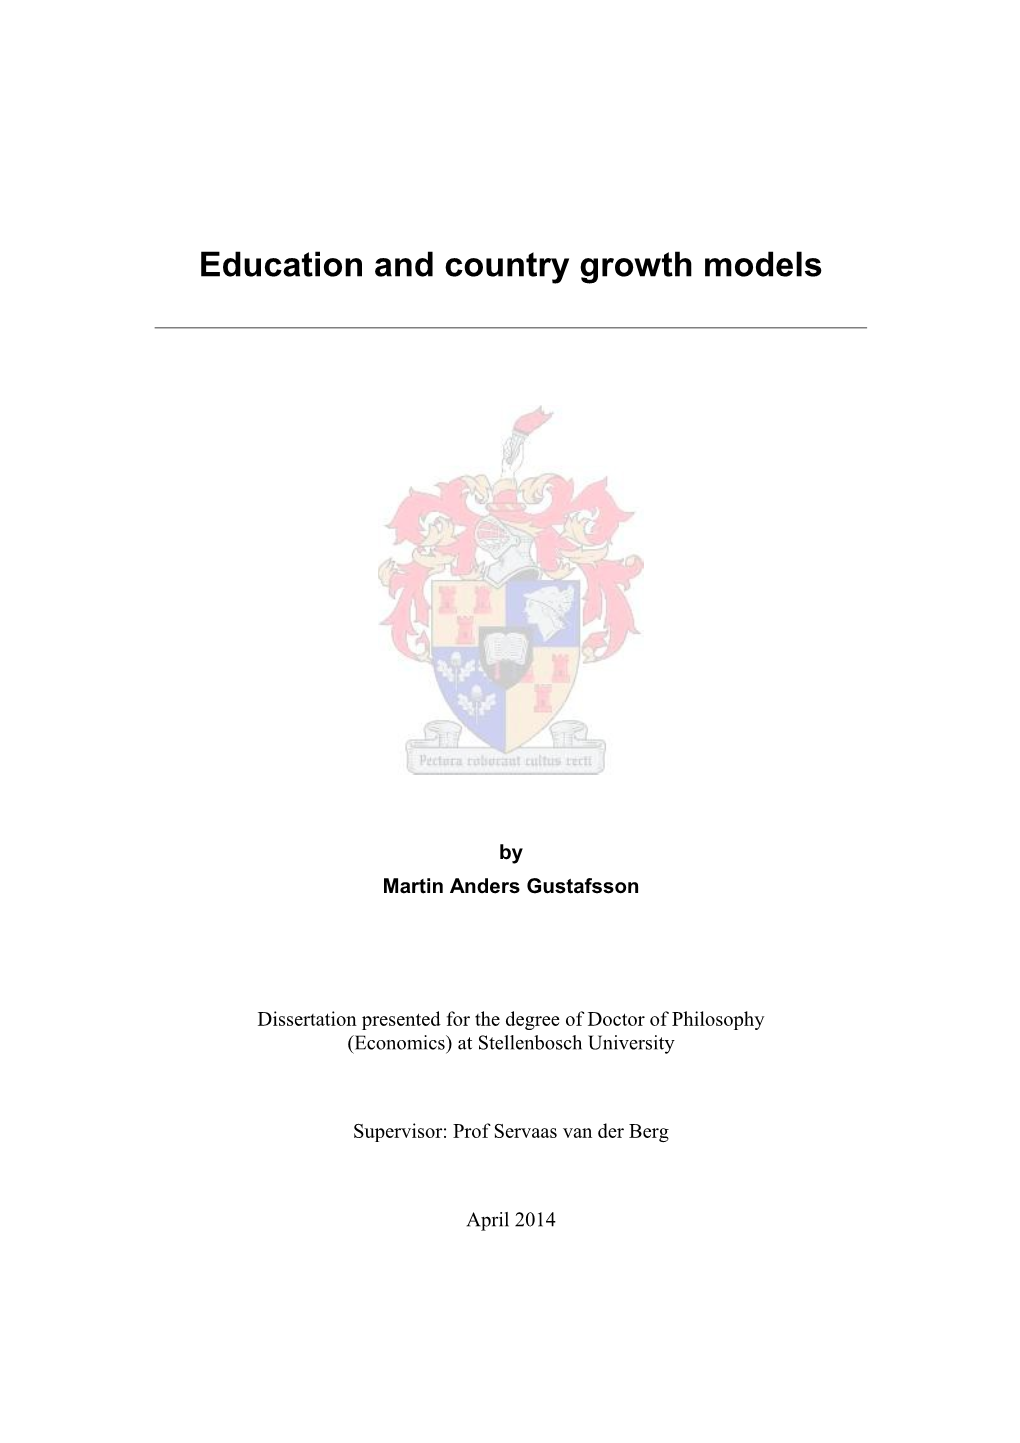 Education and Country Growth Models